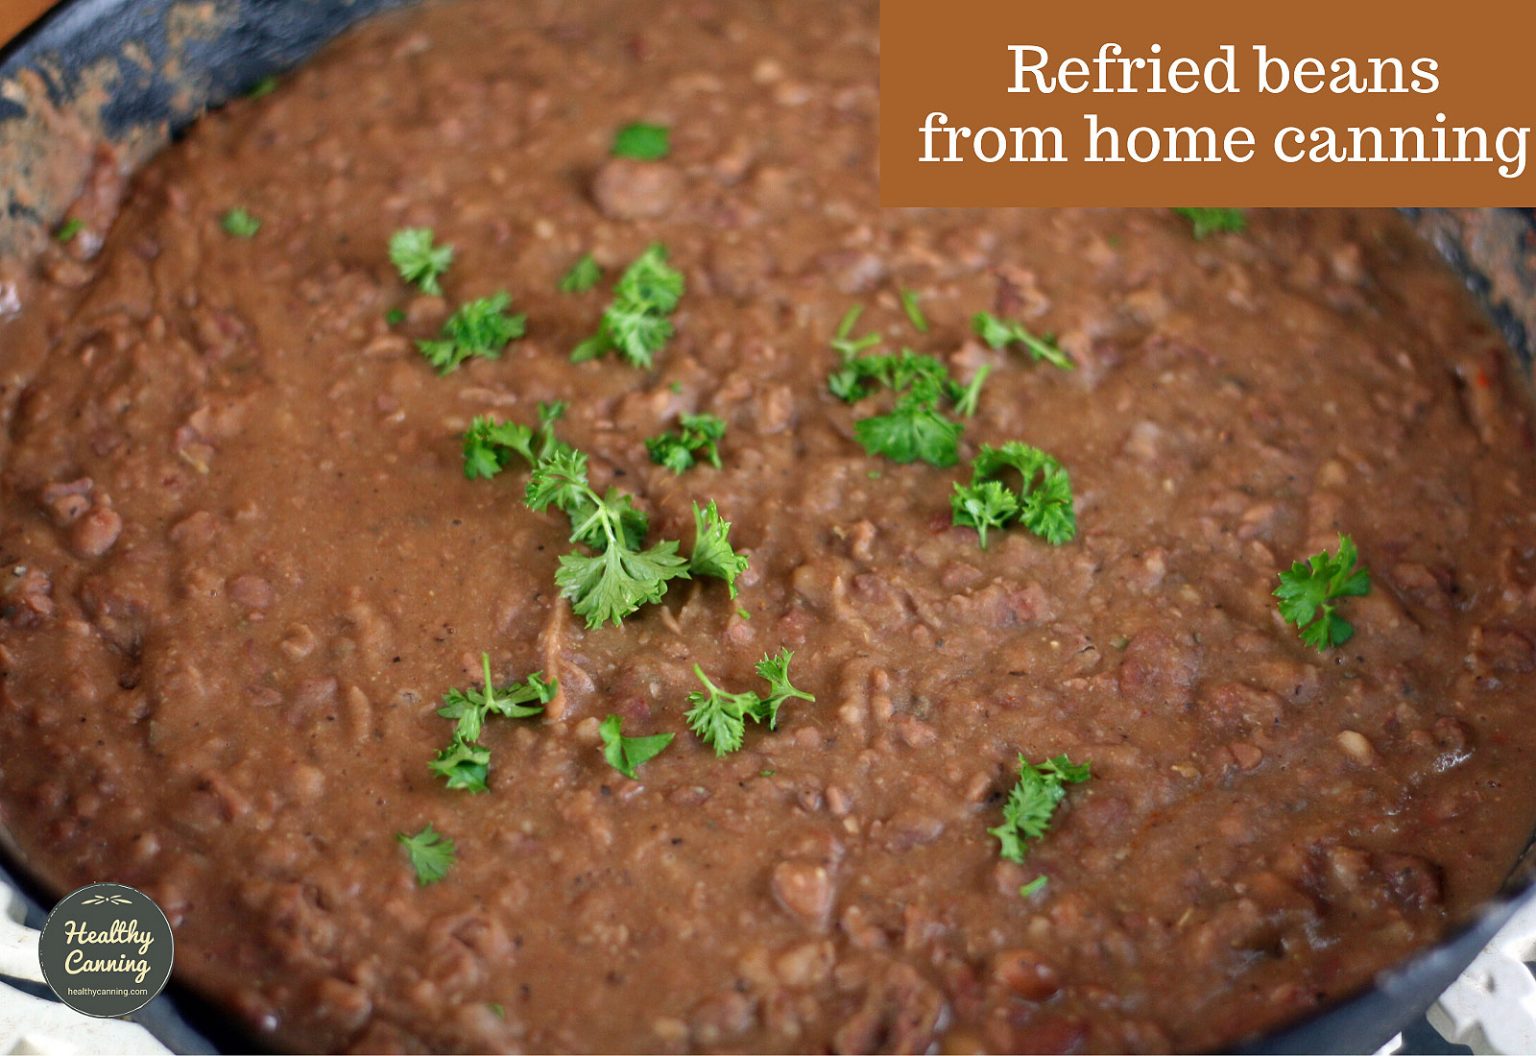 Refried beans from home canning - Healthy Canning